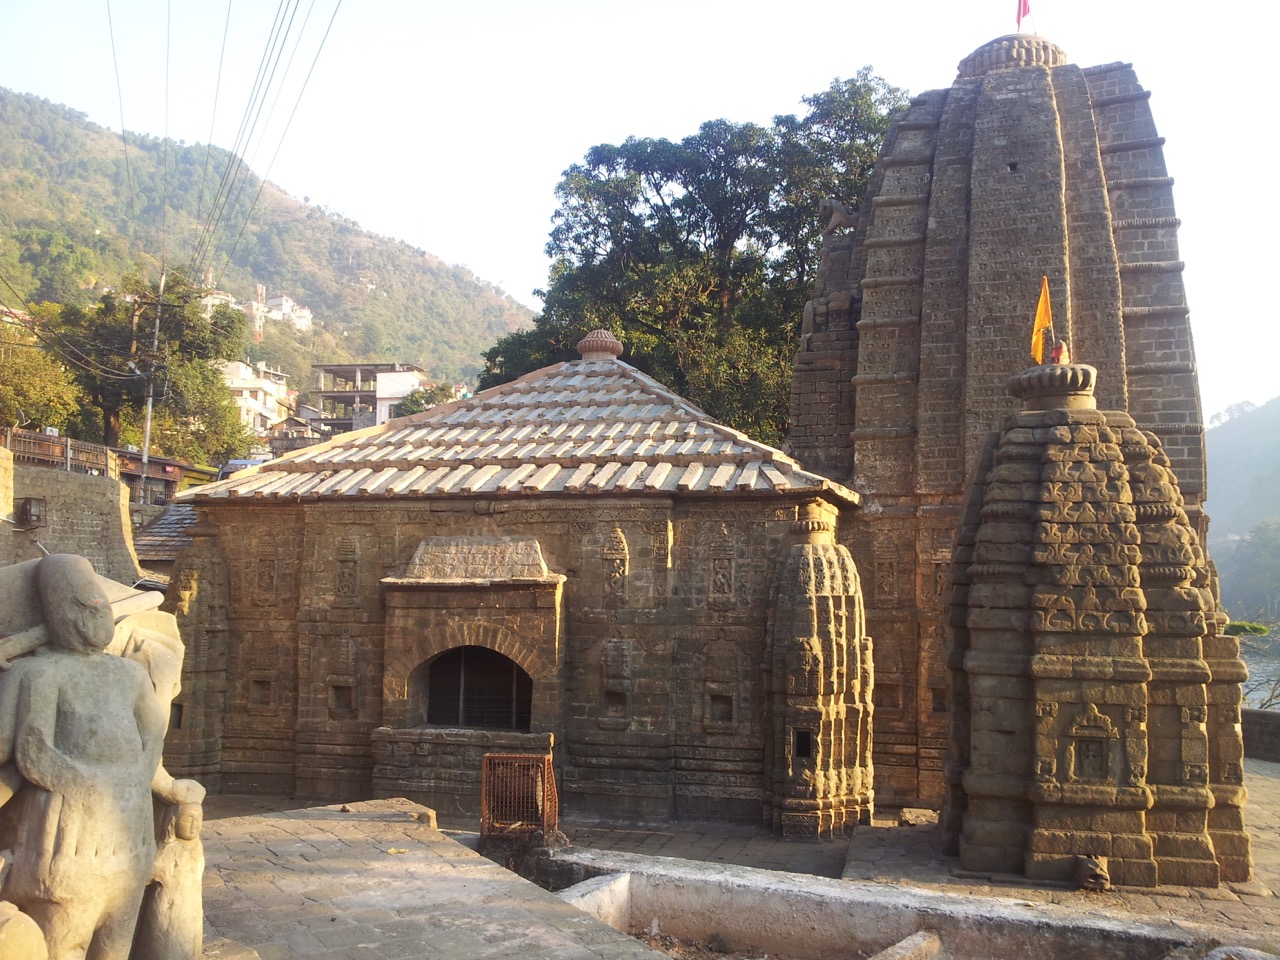 The Triloknath temple is on the National Highway. Some old idols are kept on display.